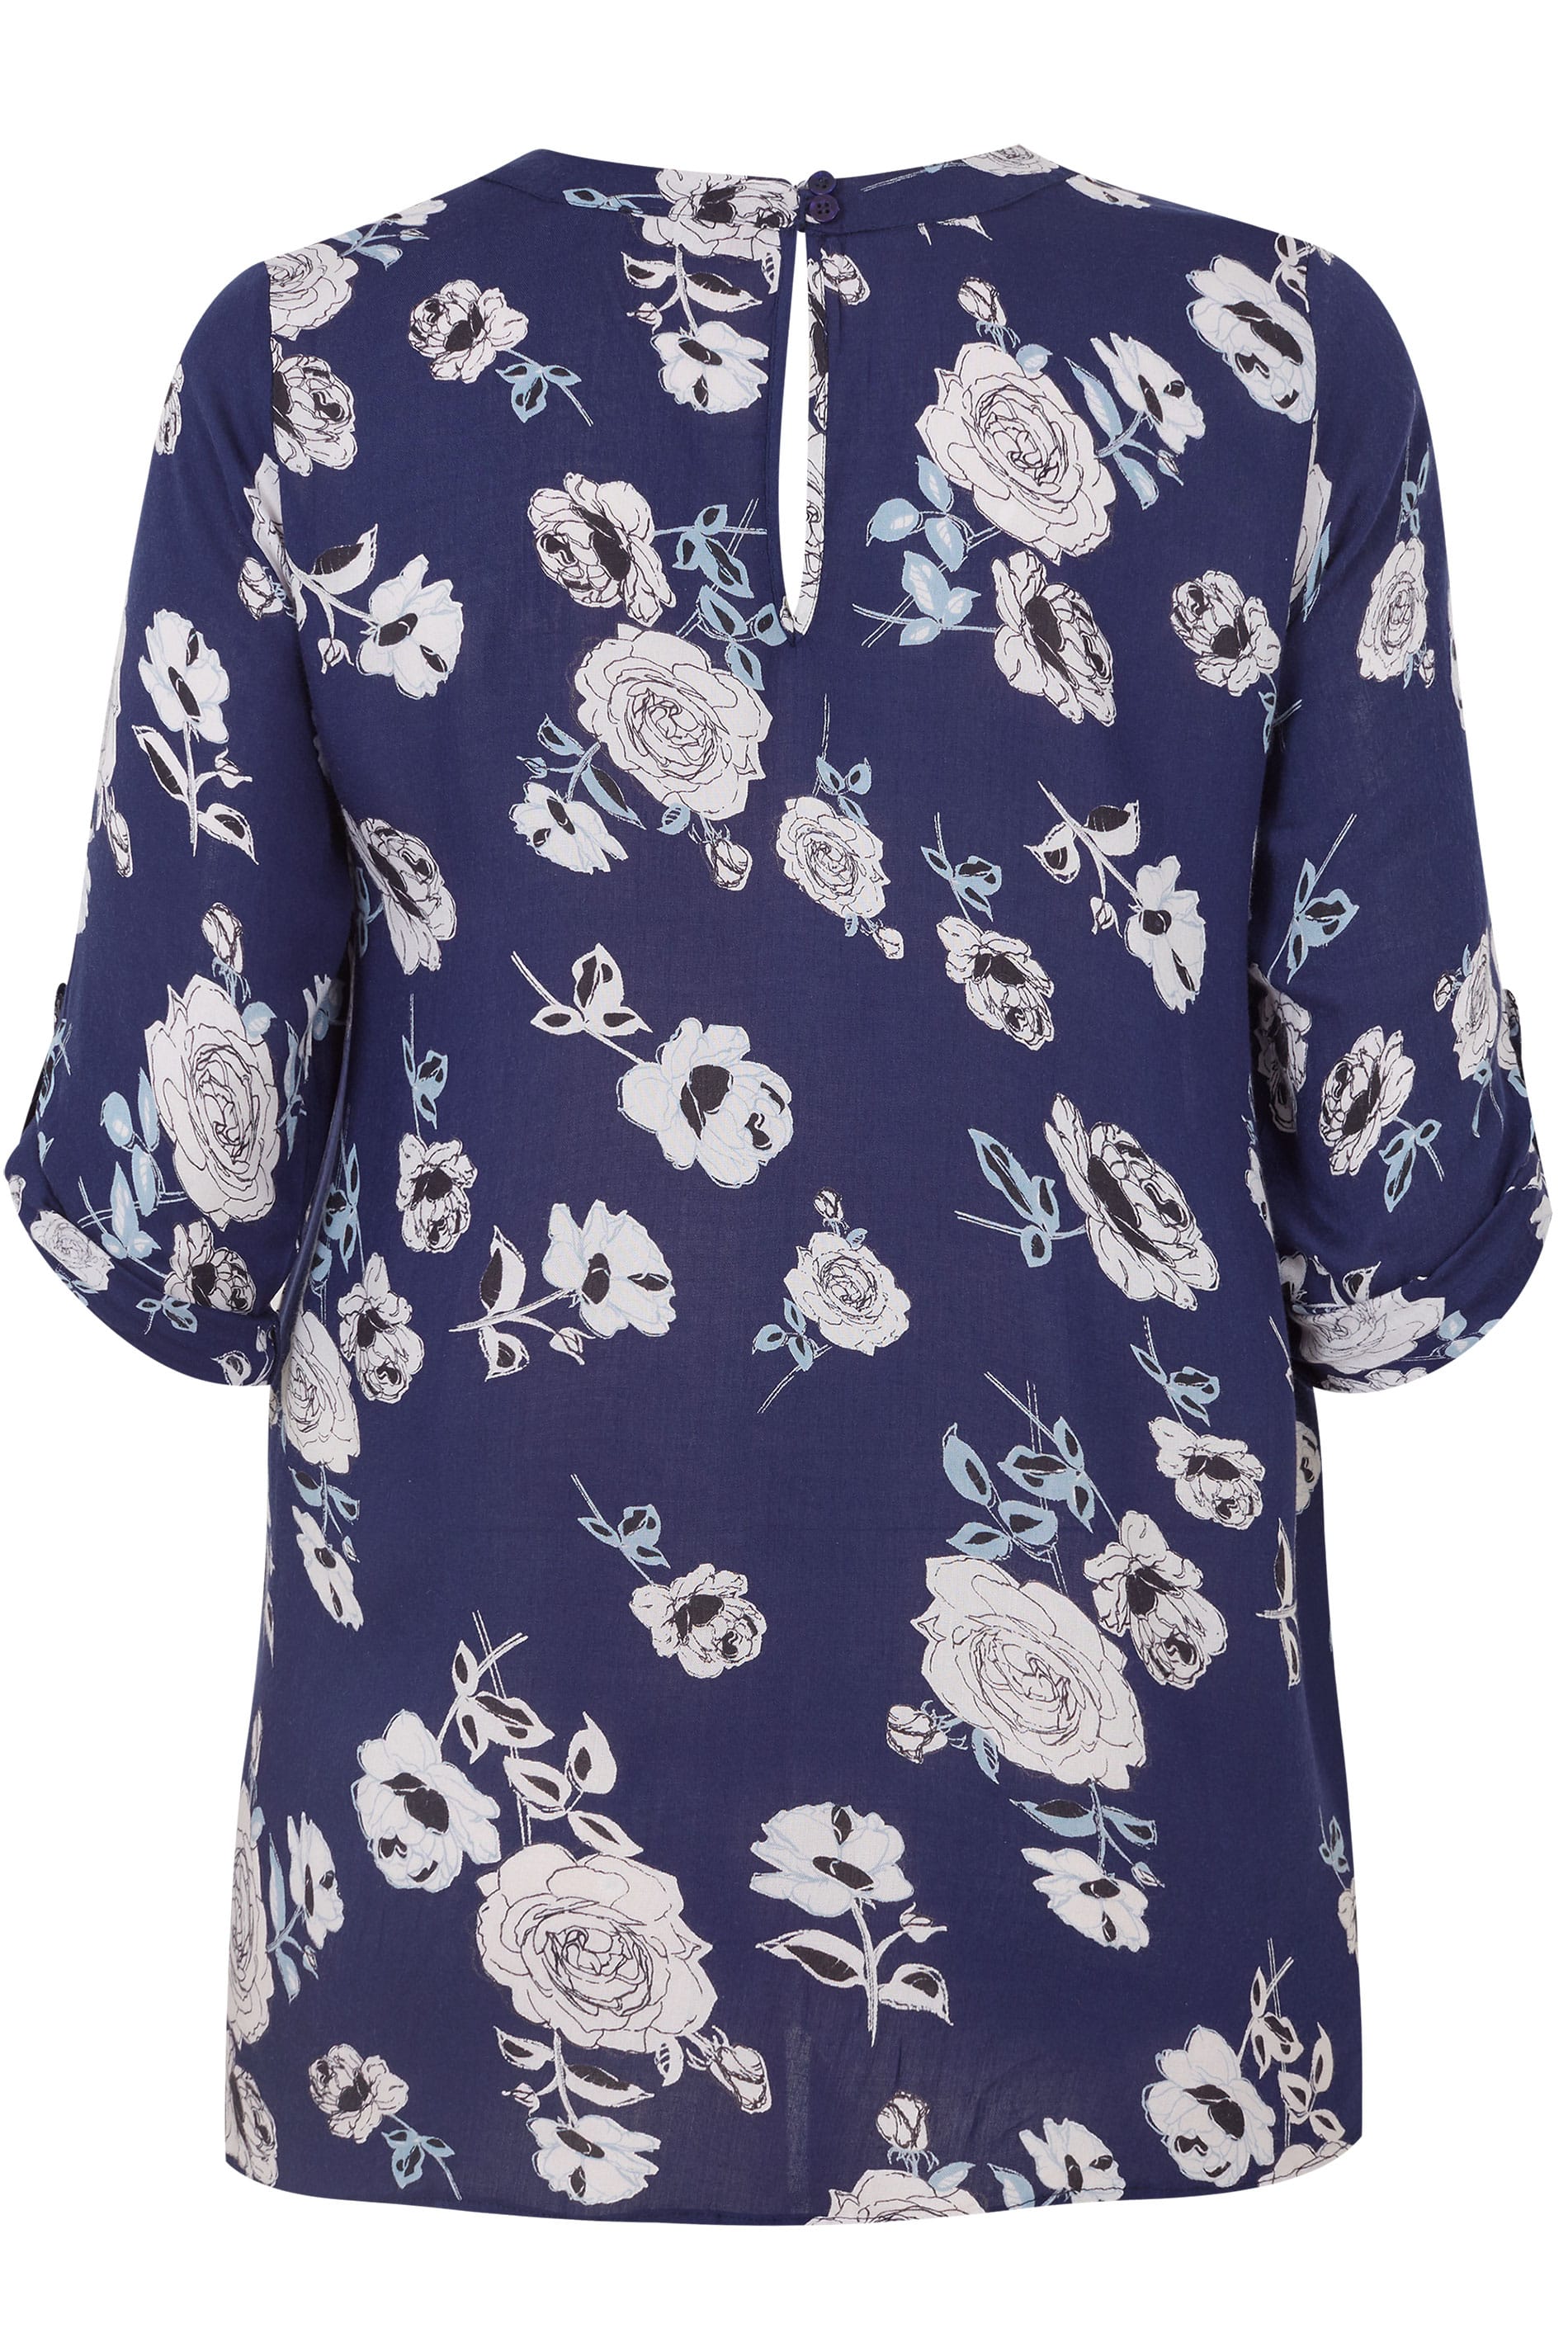 Navy Floral Woven Top, Plus size 16 to 32